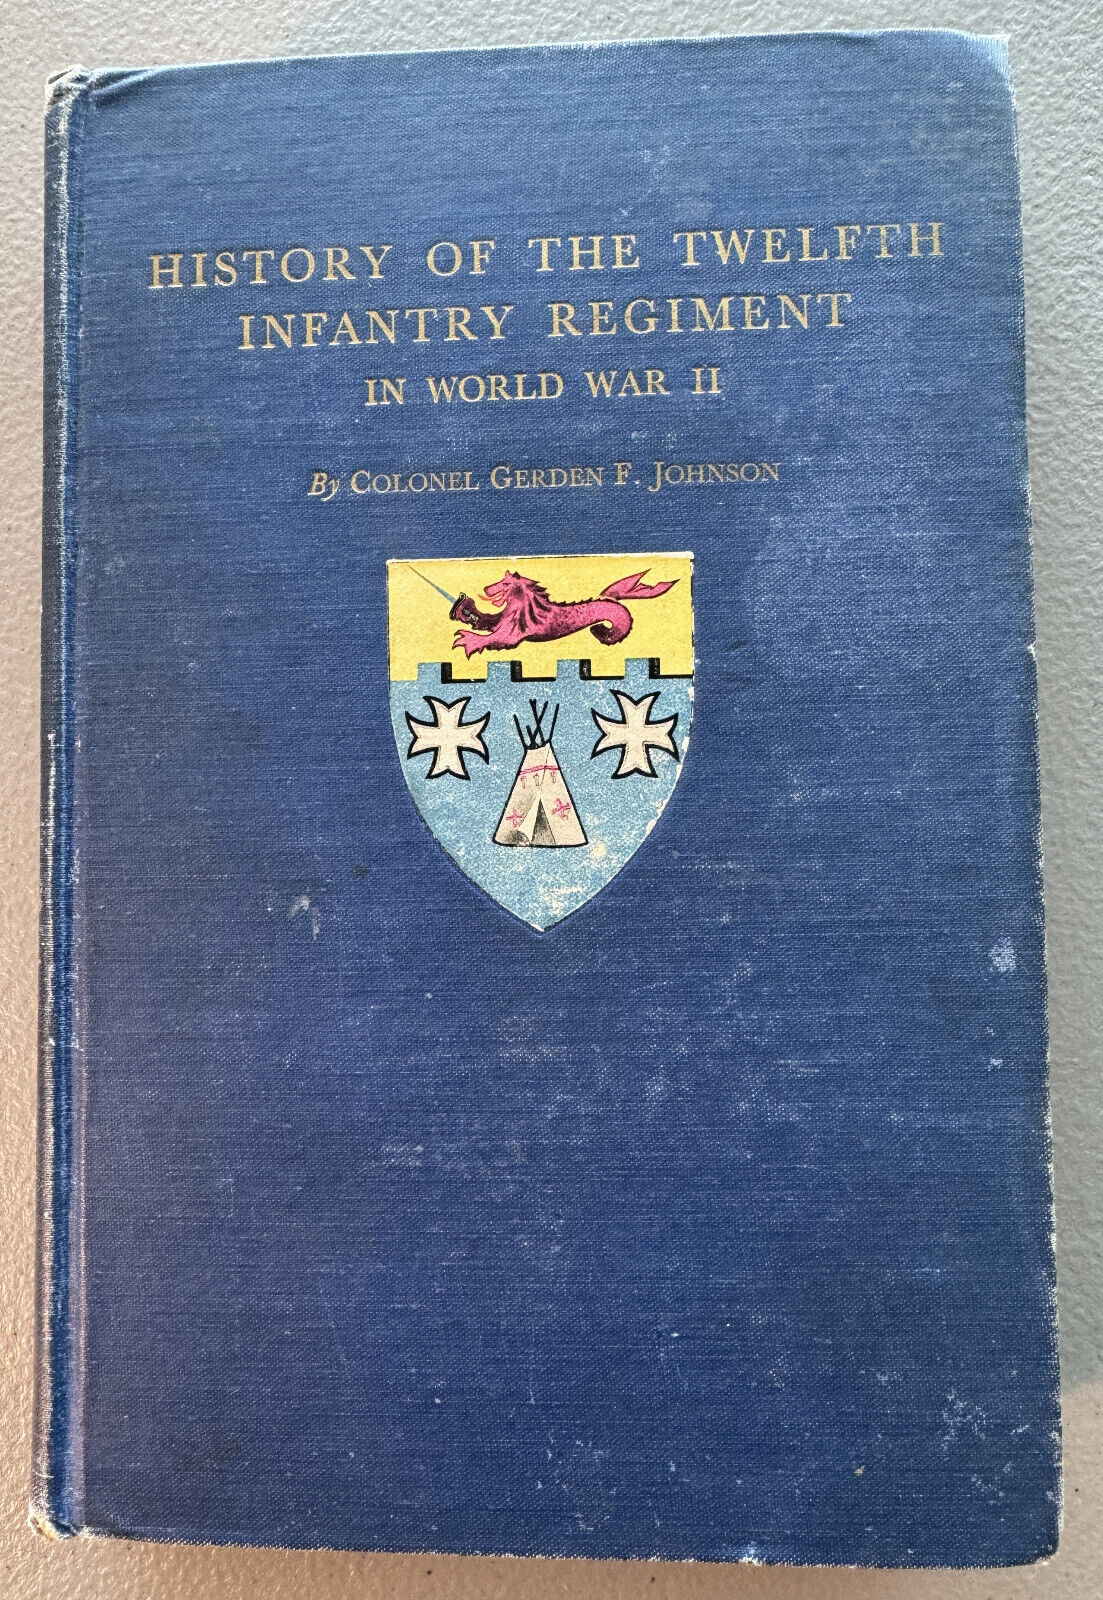 History of 12nd Infantry Regiment, 4th Infantry Division, WWII Unit History Book